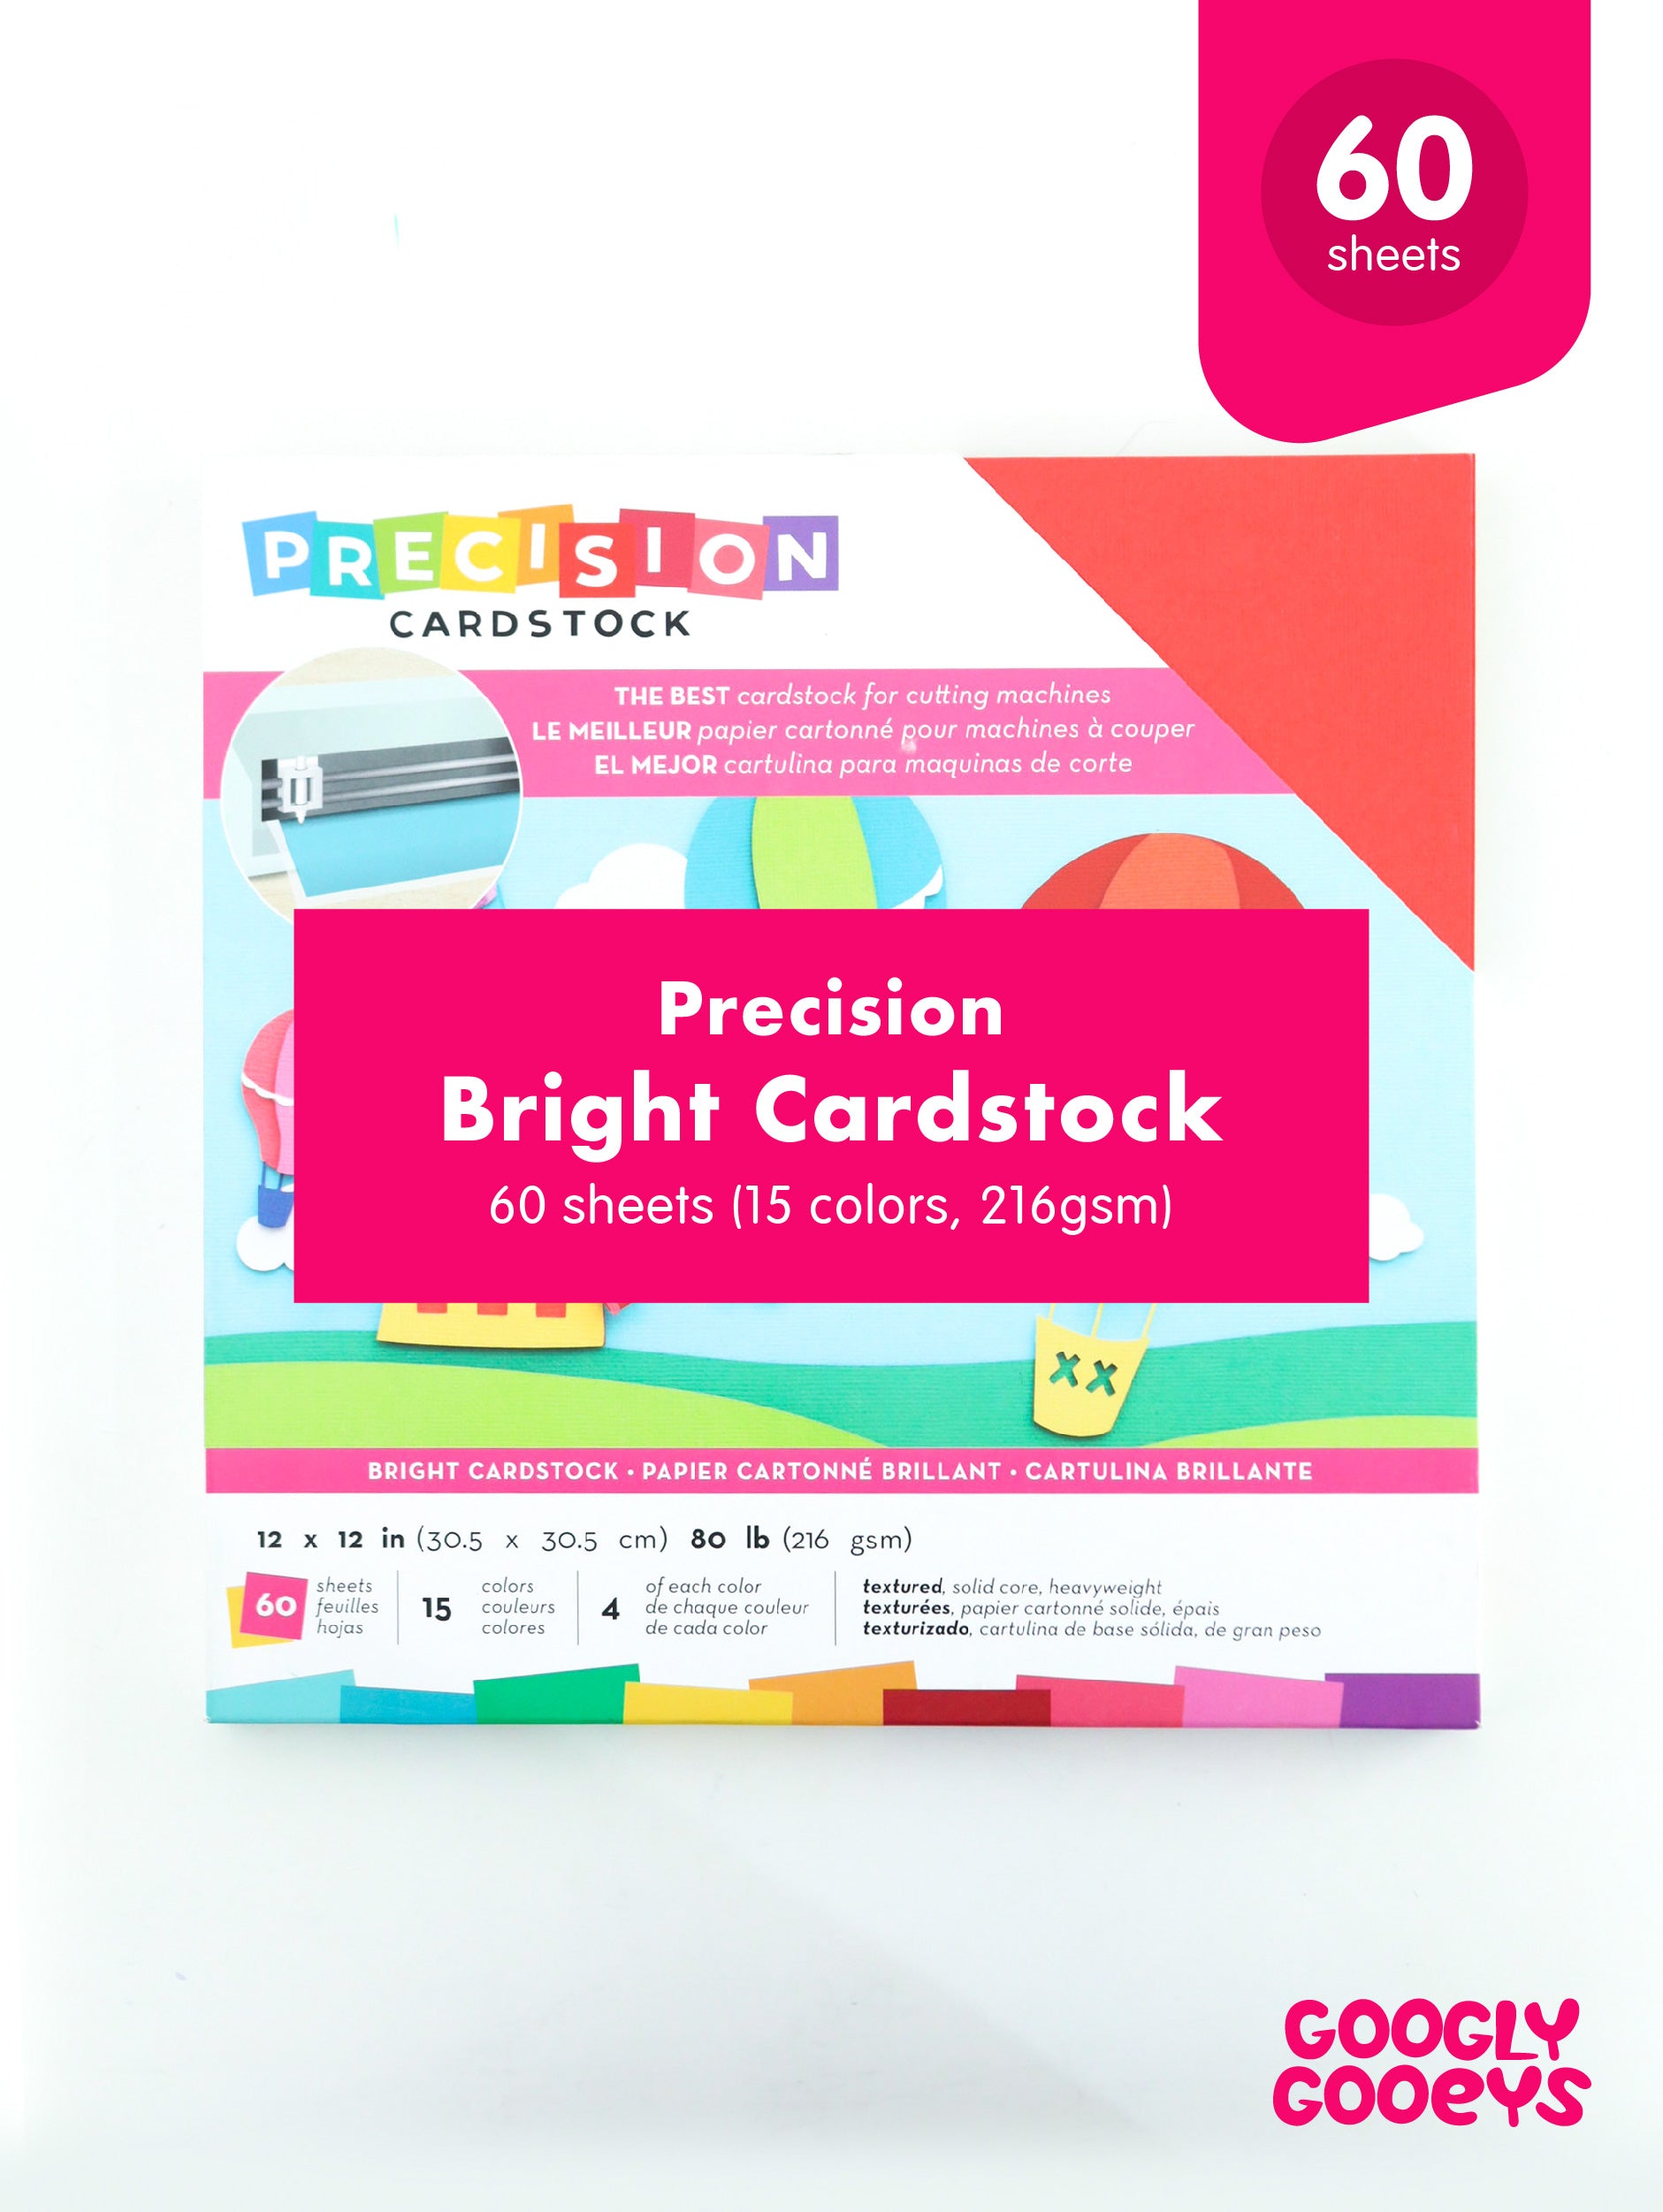 Precision Cardstock Bright 12x12 inches (60 sheets, 216gsm)